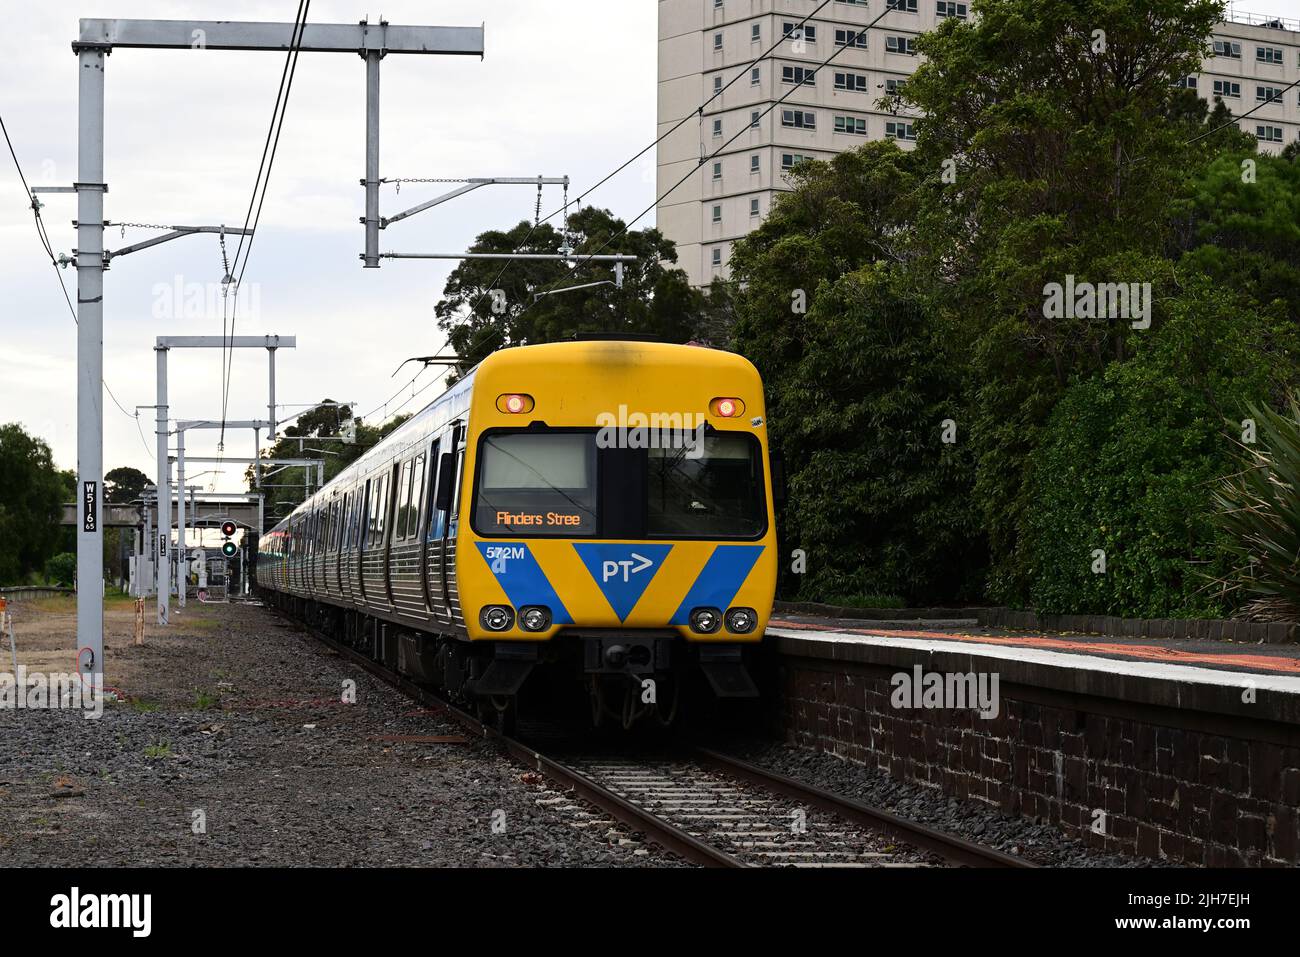 Track-level view of a Comeng train, with yellow and blue PTV livery, stopped at Williamstown Railway Station Stock Photo